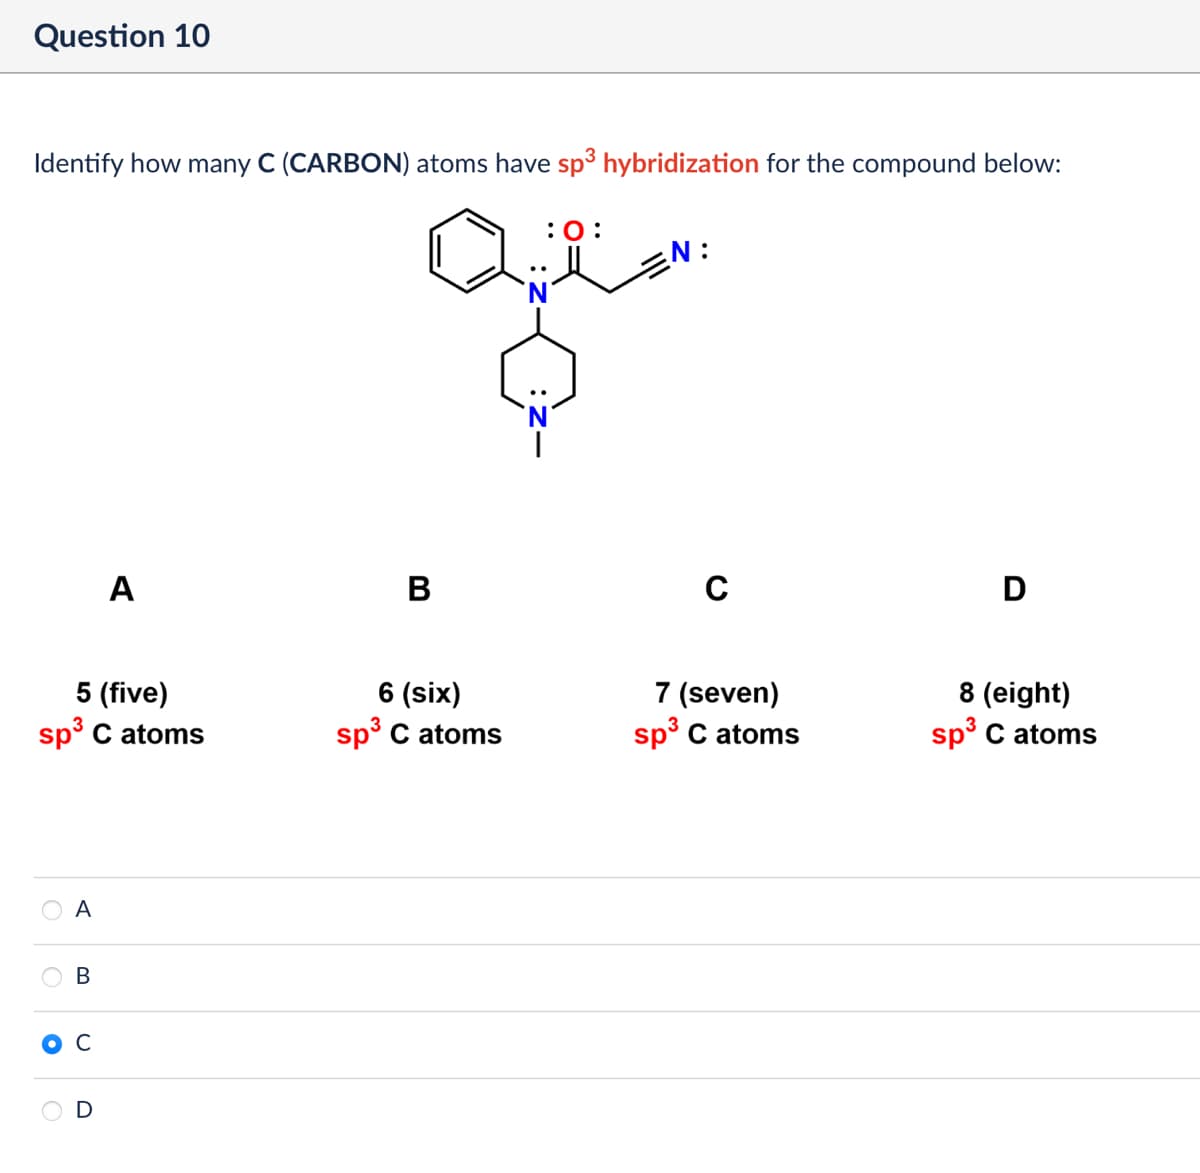 Question 10
Identify how many C (CARBON) atoms have sp³ hybridization for the compound below:
: 0:
A
B
..
5 (five)
6 (six)
3
sp³ C atoms
sp³ C atoms
A
°
B
C
D
N:
C
D
7 (seven)
sp³ C atoms
8 (eight)
sp³ C atoms